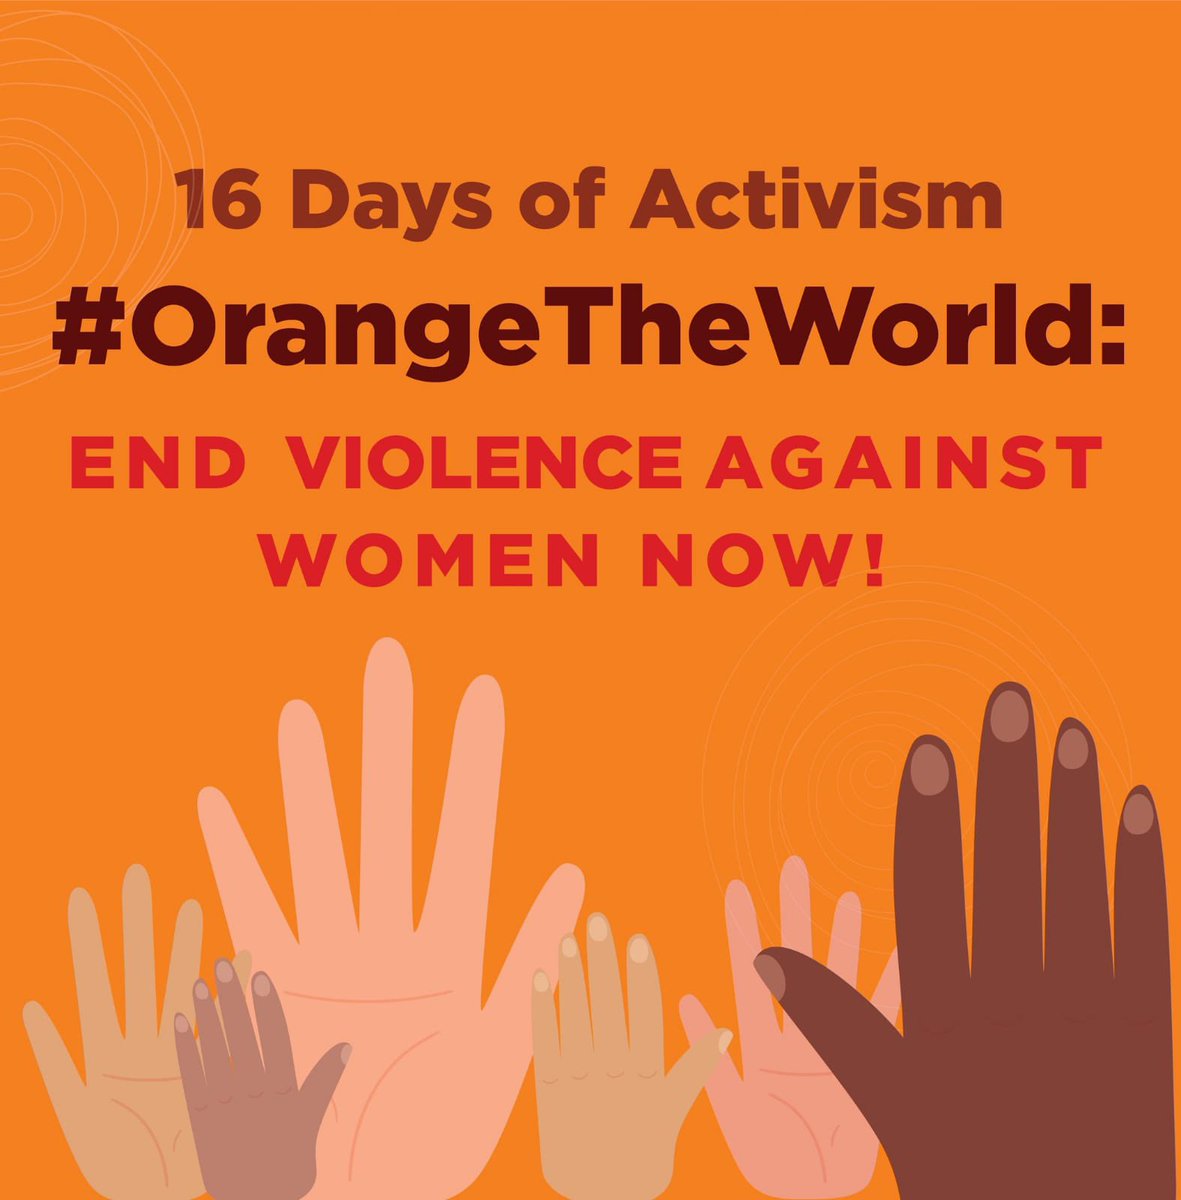 25 November is International Day to #EndViolence Against #Women. We must all work together in Lebanon 🇱🇧 and around the world 🌍 to put an end to sexual and gender-based violence and its consequences. We must #EndViolenceTogether #OrangeTheWorld #16Days